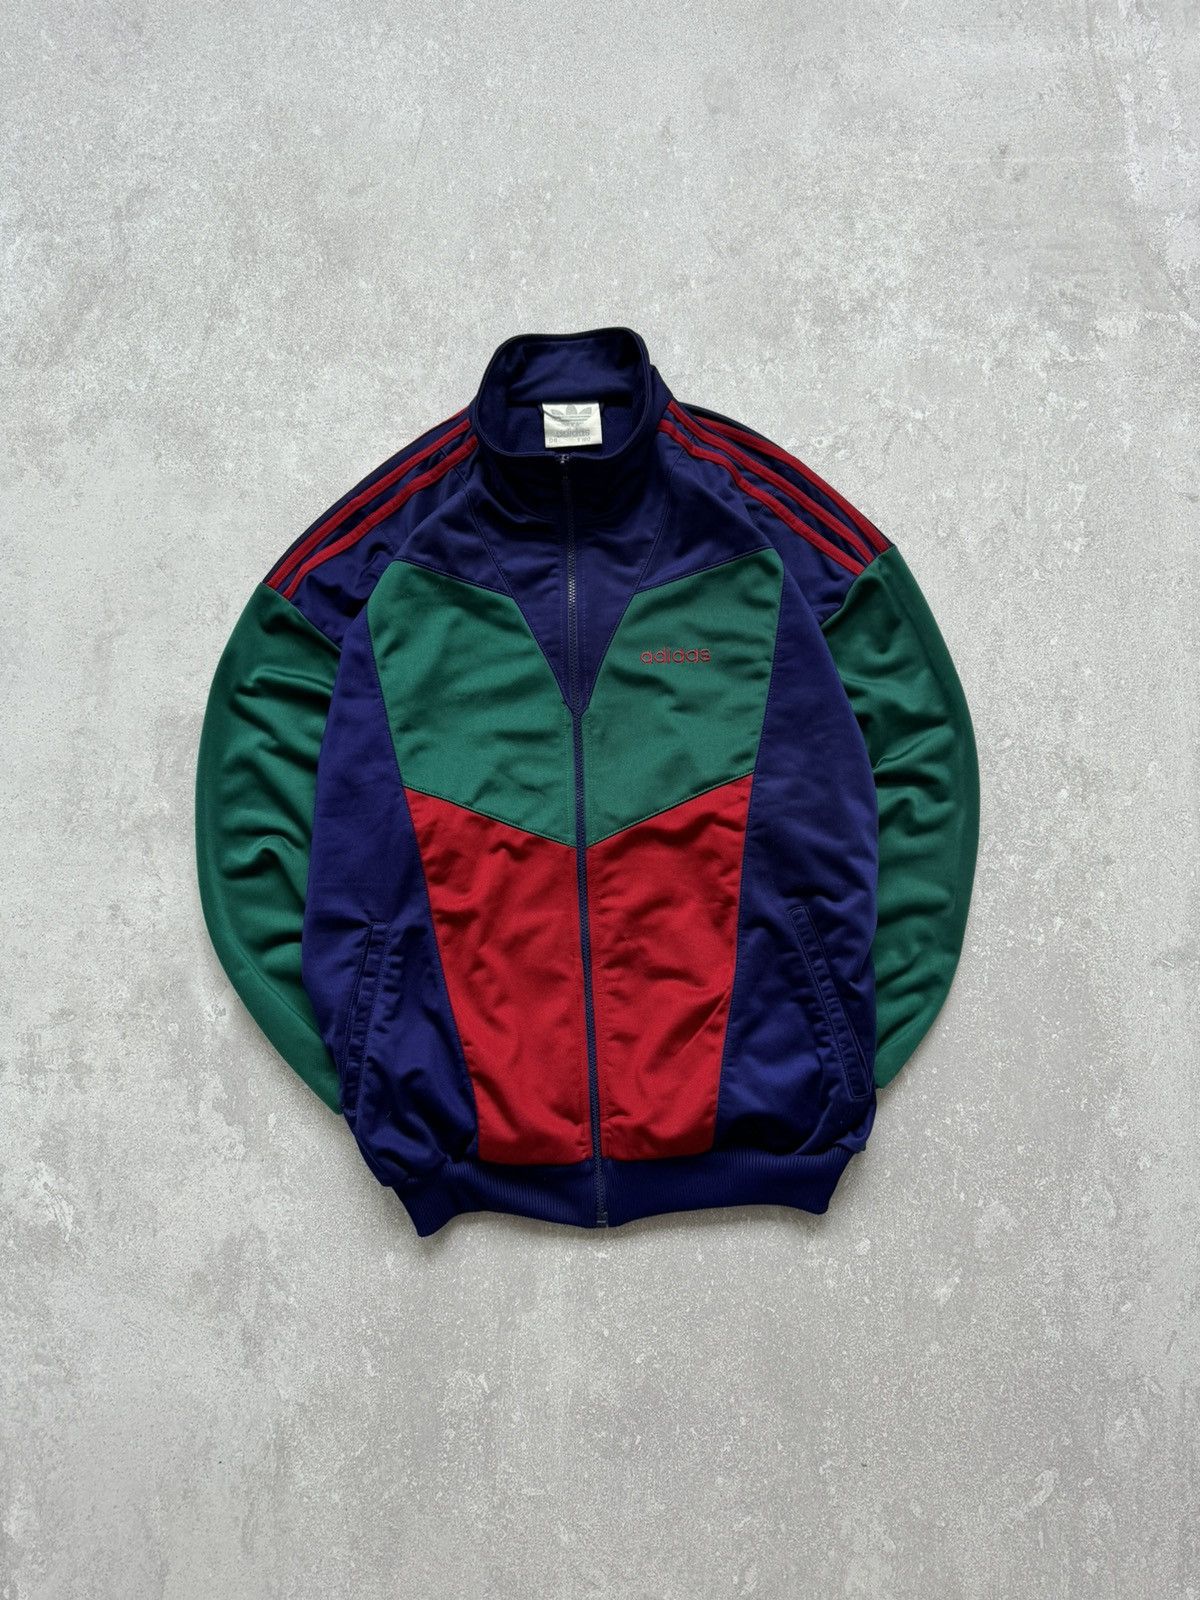 Pre-owned Adidas X Vintage Adidas 90's Multicolor Track Jacket Olympic